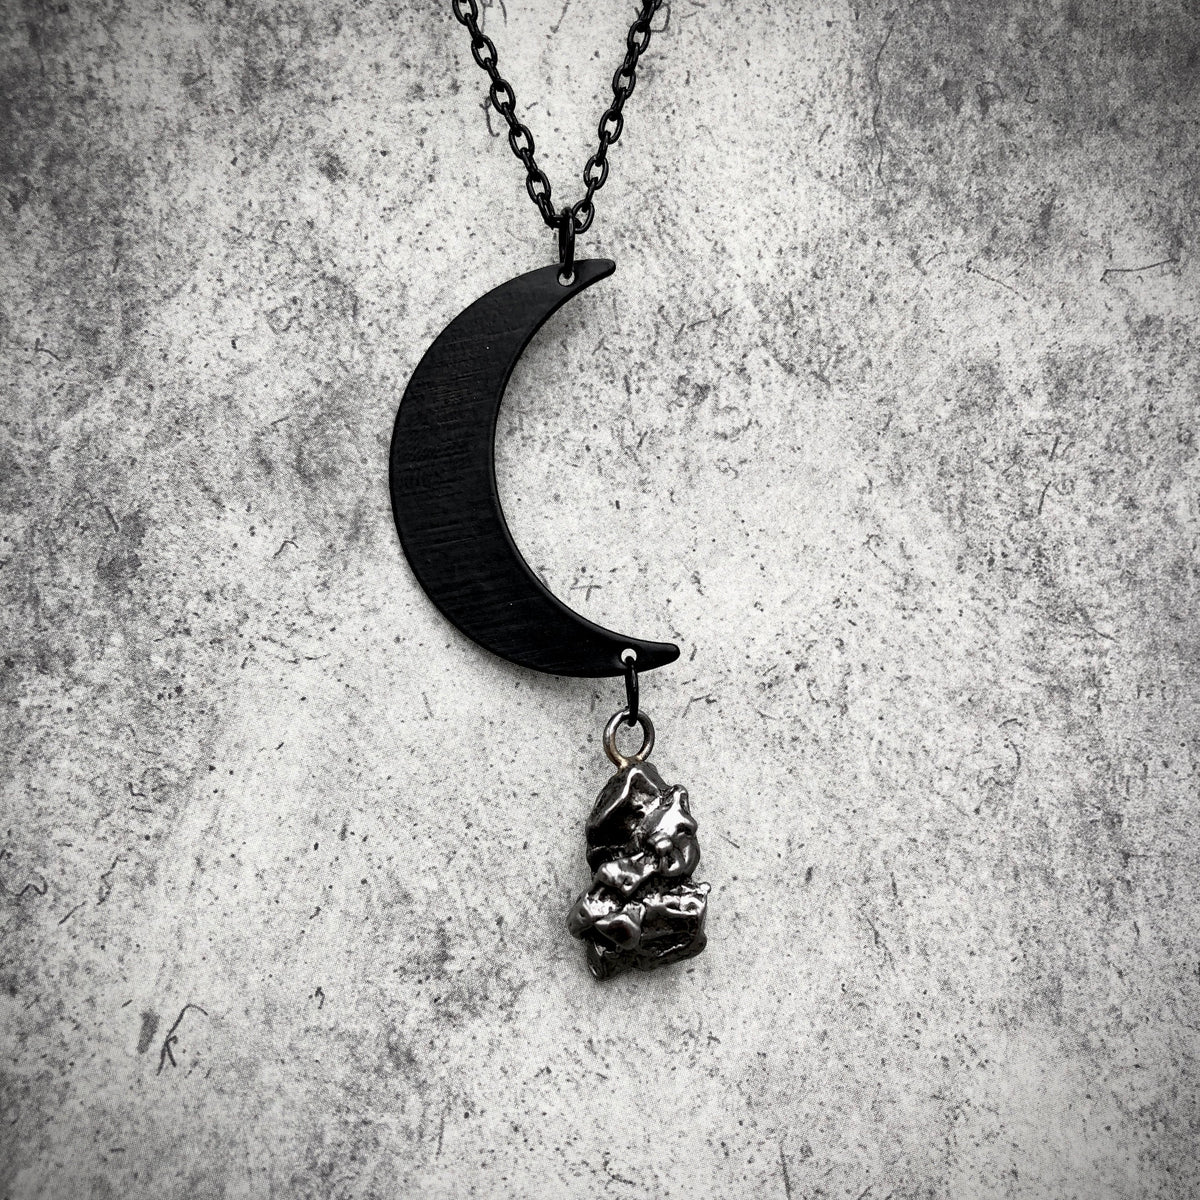 Crescent Moon Necklace with Meteorite, Genuine Space Fragment Waning Moon Lunar Necklace Campo Del Cielo Iron Pendant.